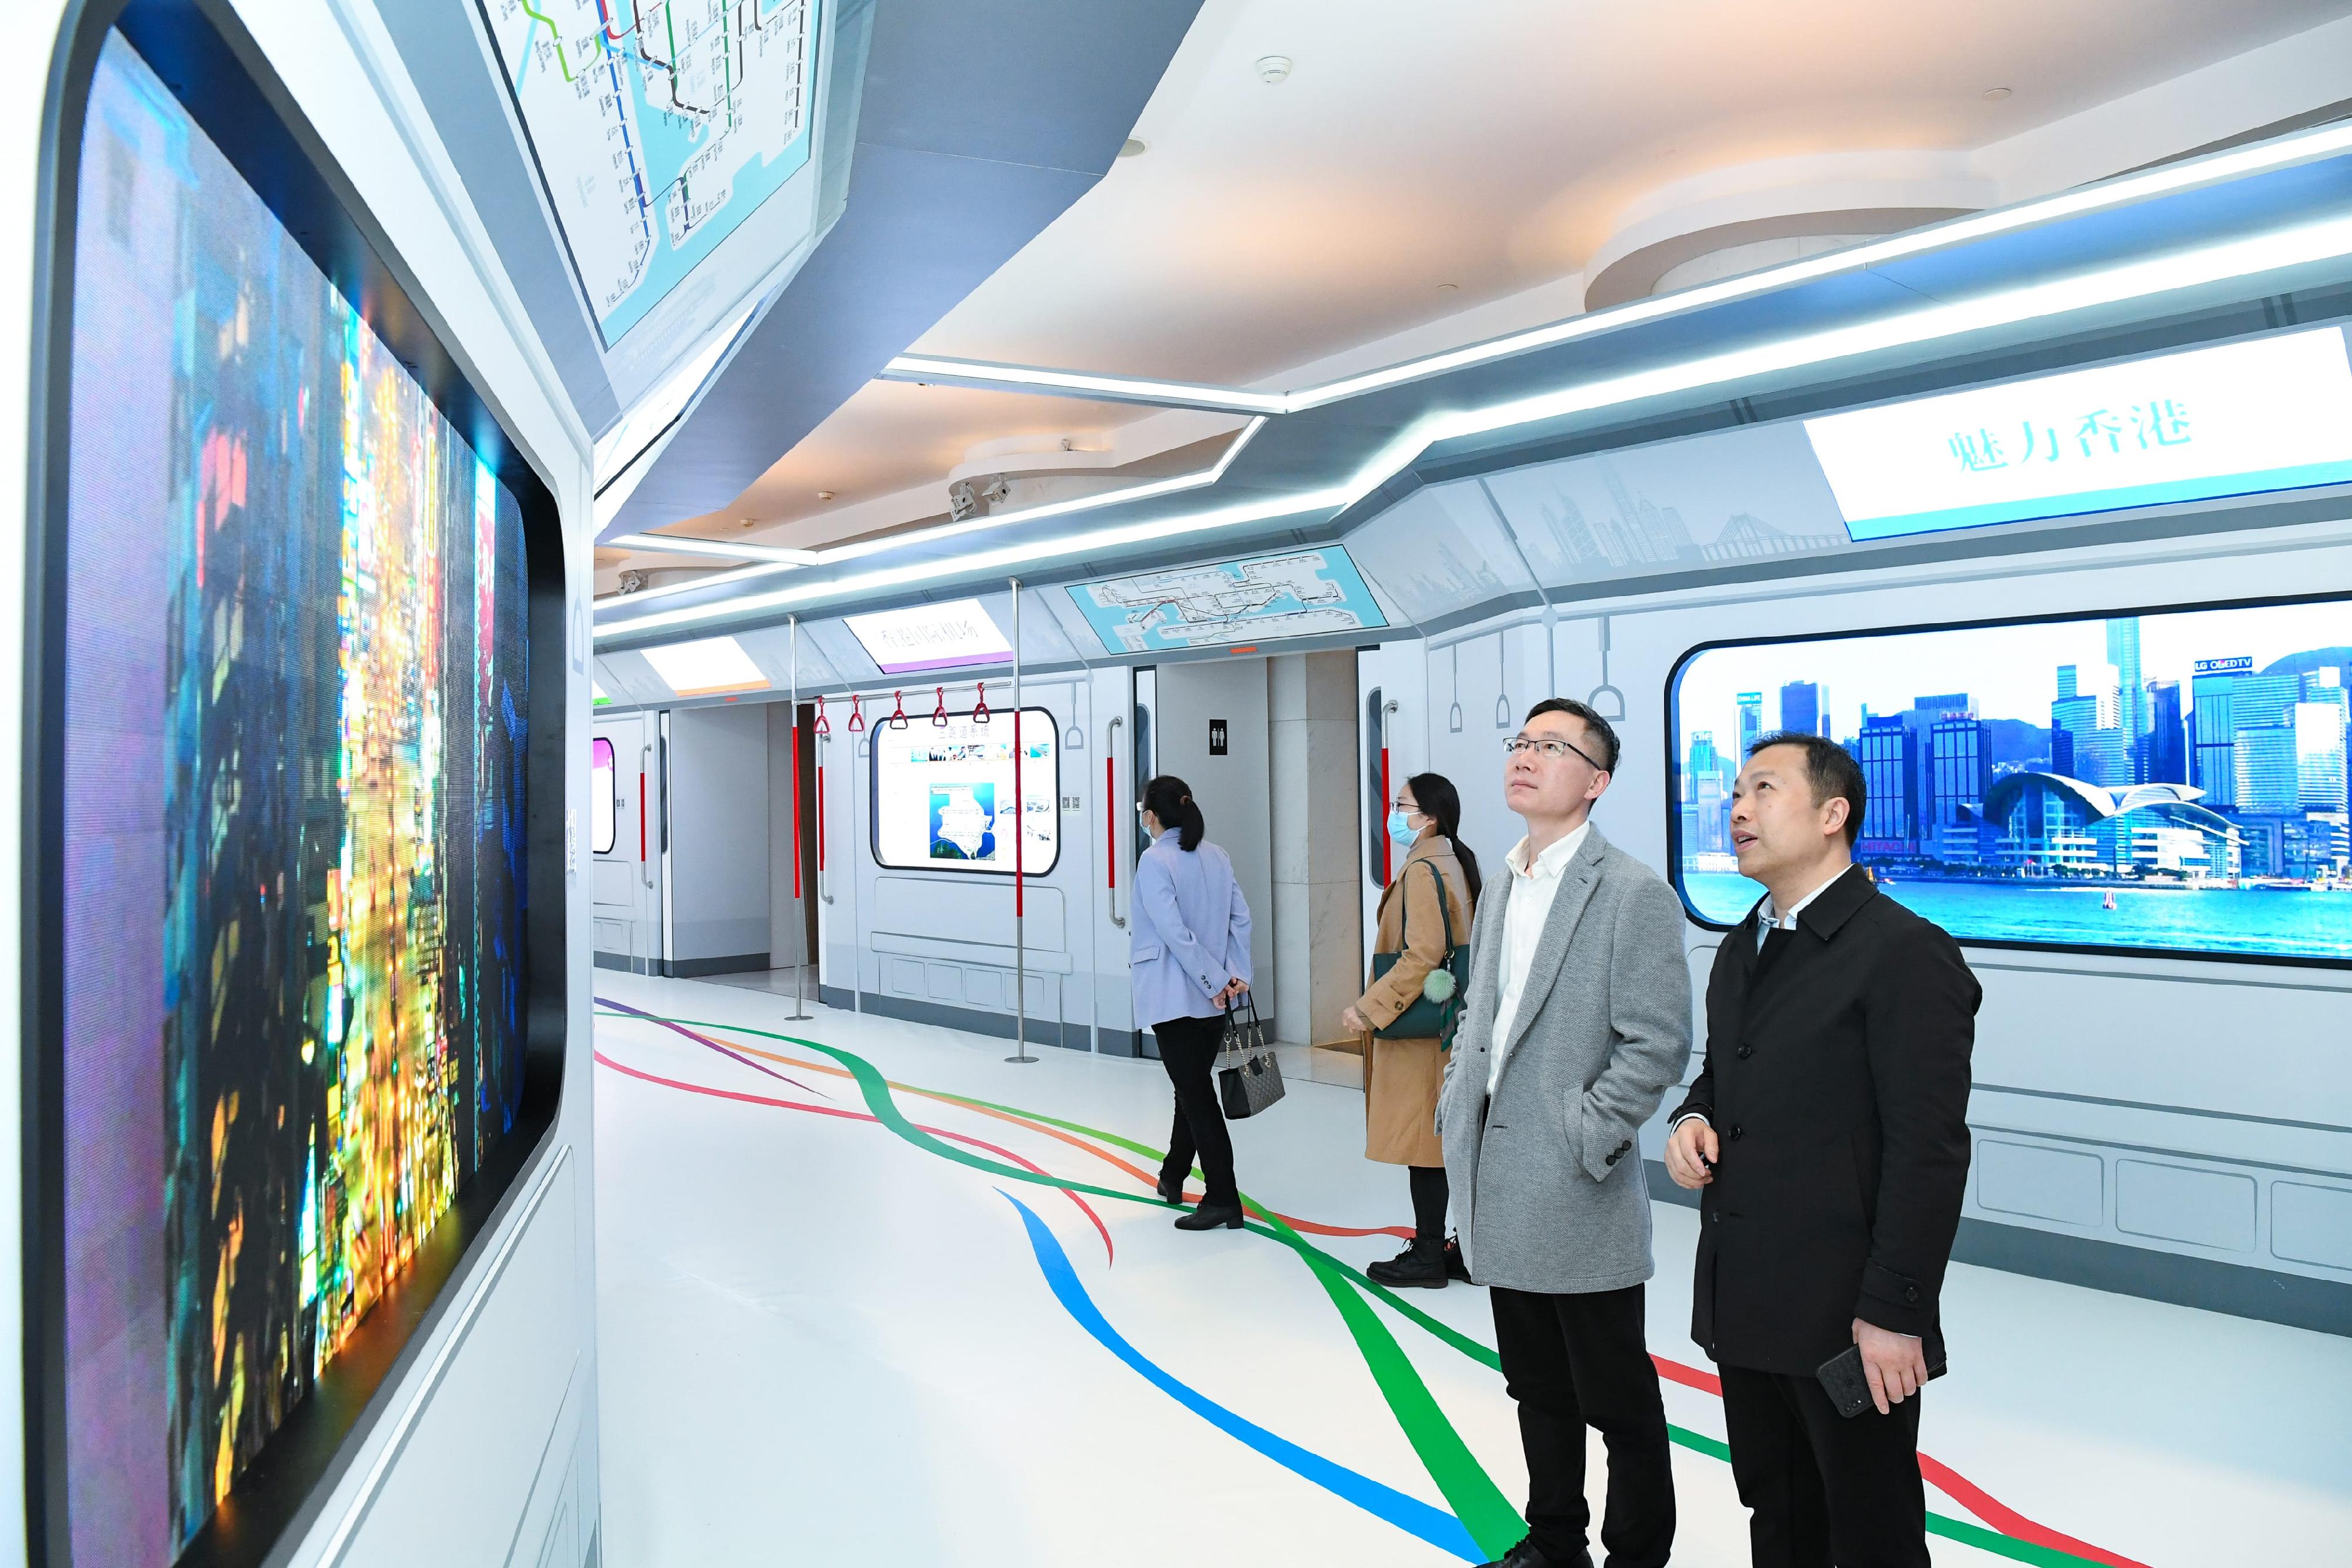 The Hong Kong Economic and Trade Office in Shanghai held a "Hello, Hong Kong!" East China Region Reception in Shanghai today (March 23). Photo shows the reception venue with a theme of Hong Kong MTR car compartments. Hong Kong's sceneries and information on its latest developments are displayed on the LED screens as windows.